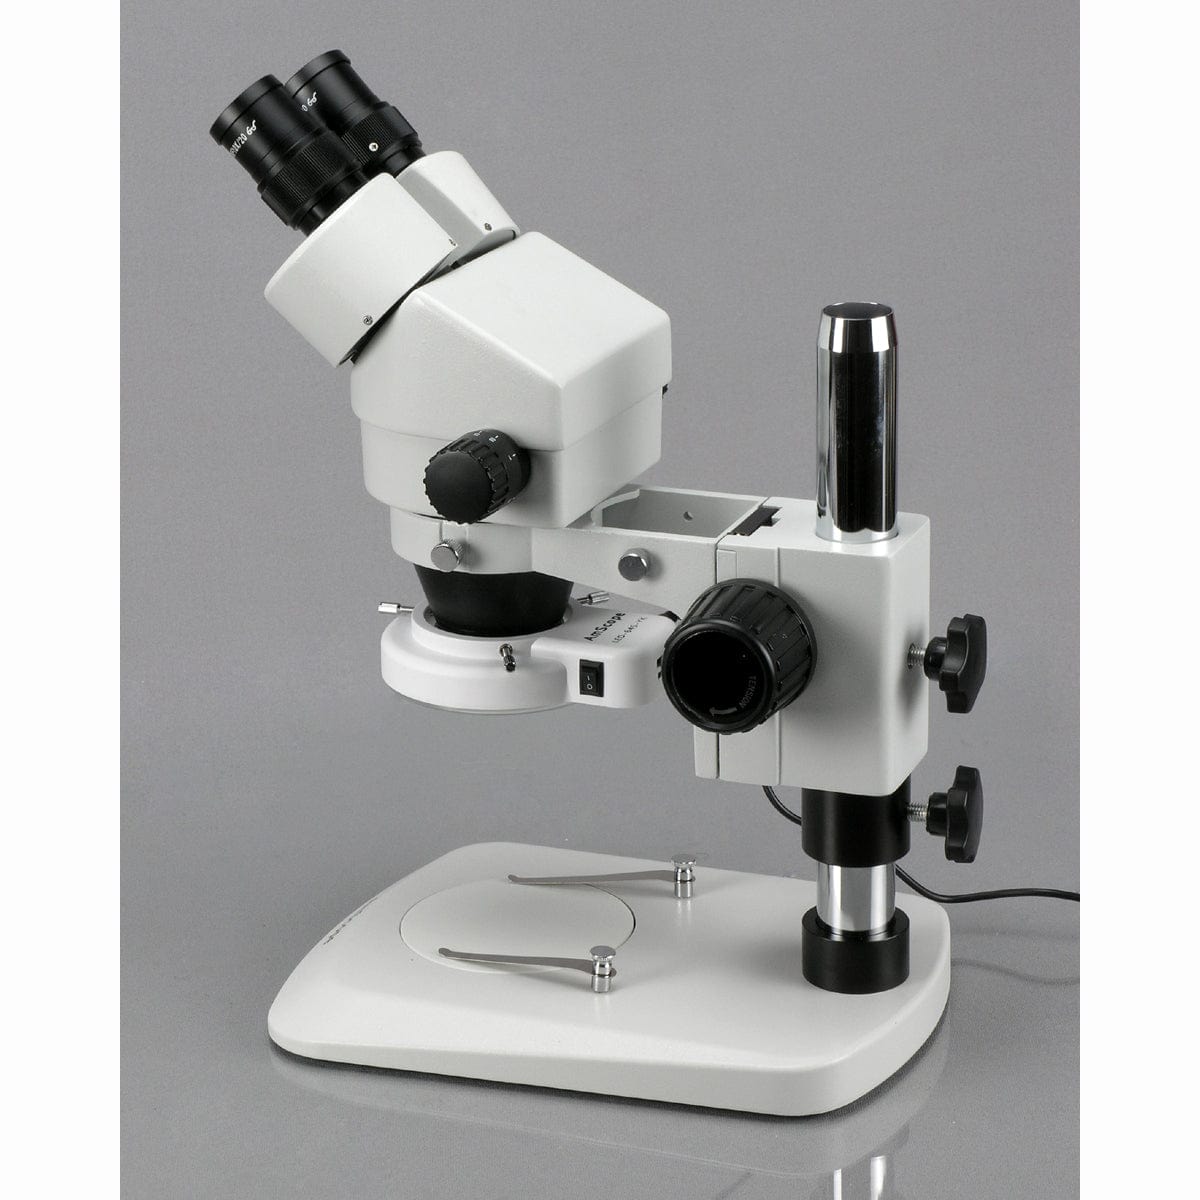 Amscope SM-1BN-64S 7X - 45X Inspection Dissecting Pillar Stand Zoom Stereo Microscope with 64 LED Light New